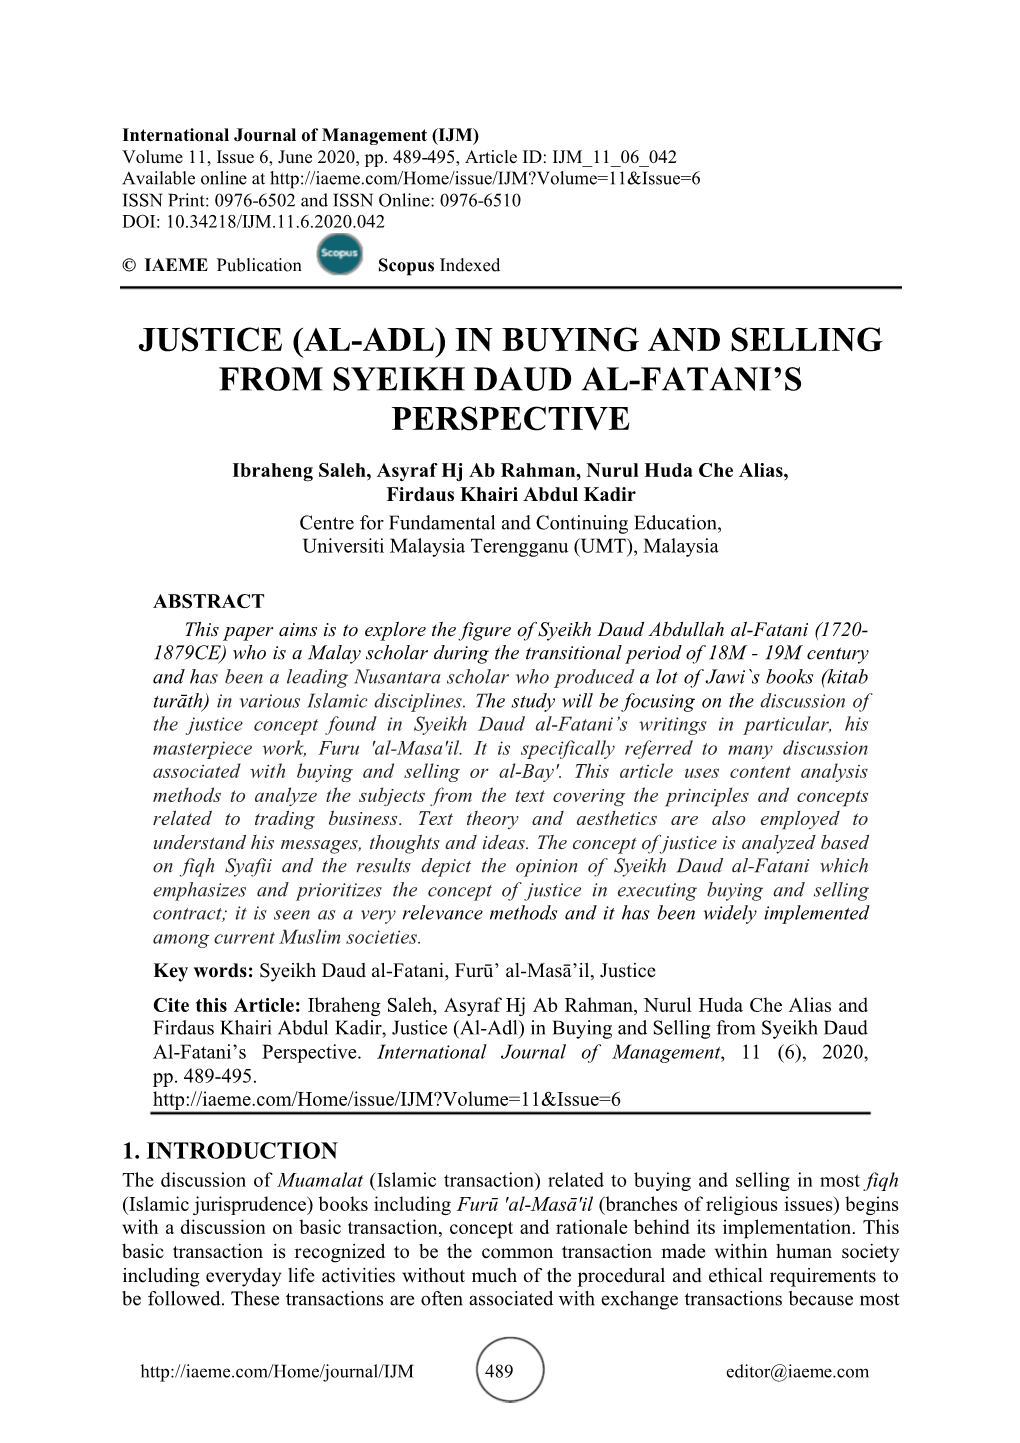 In Buying and Selling Al from Syeikh Daud Al-Fatani's Perspective